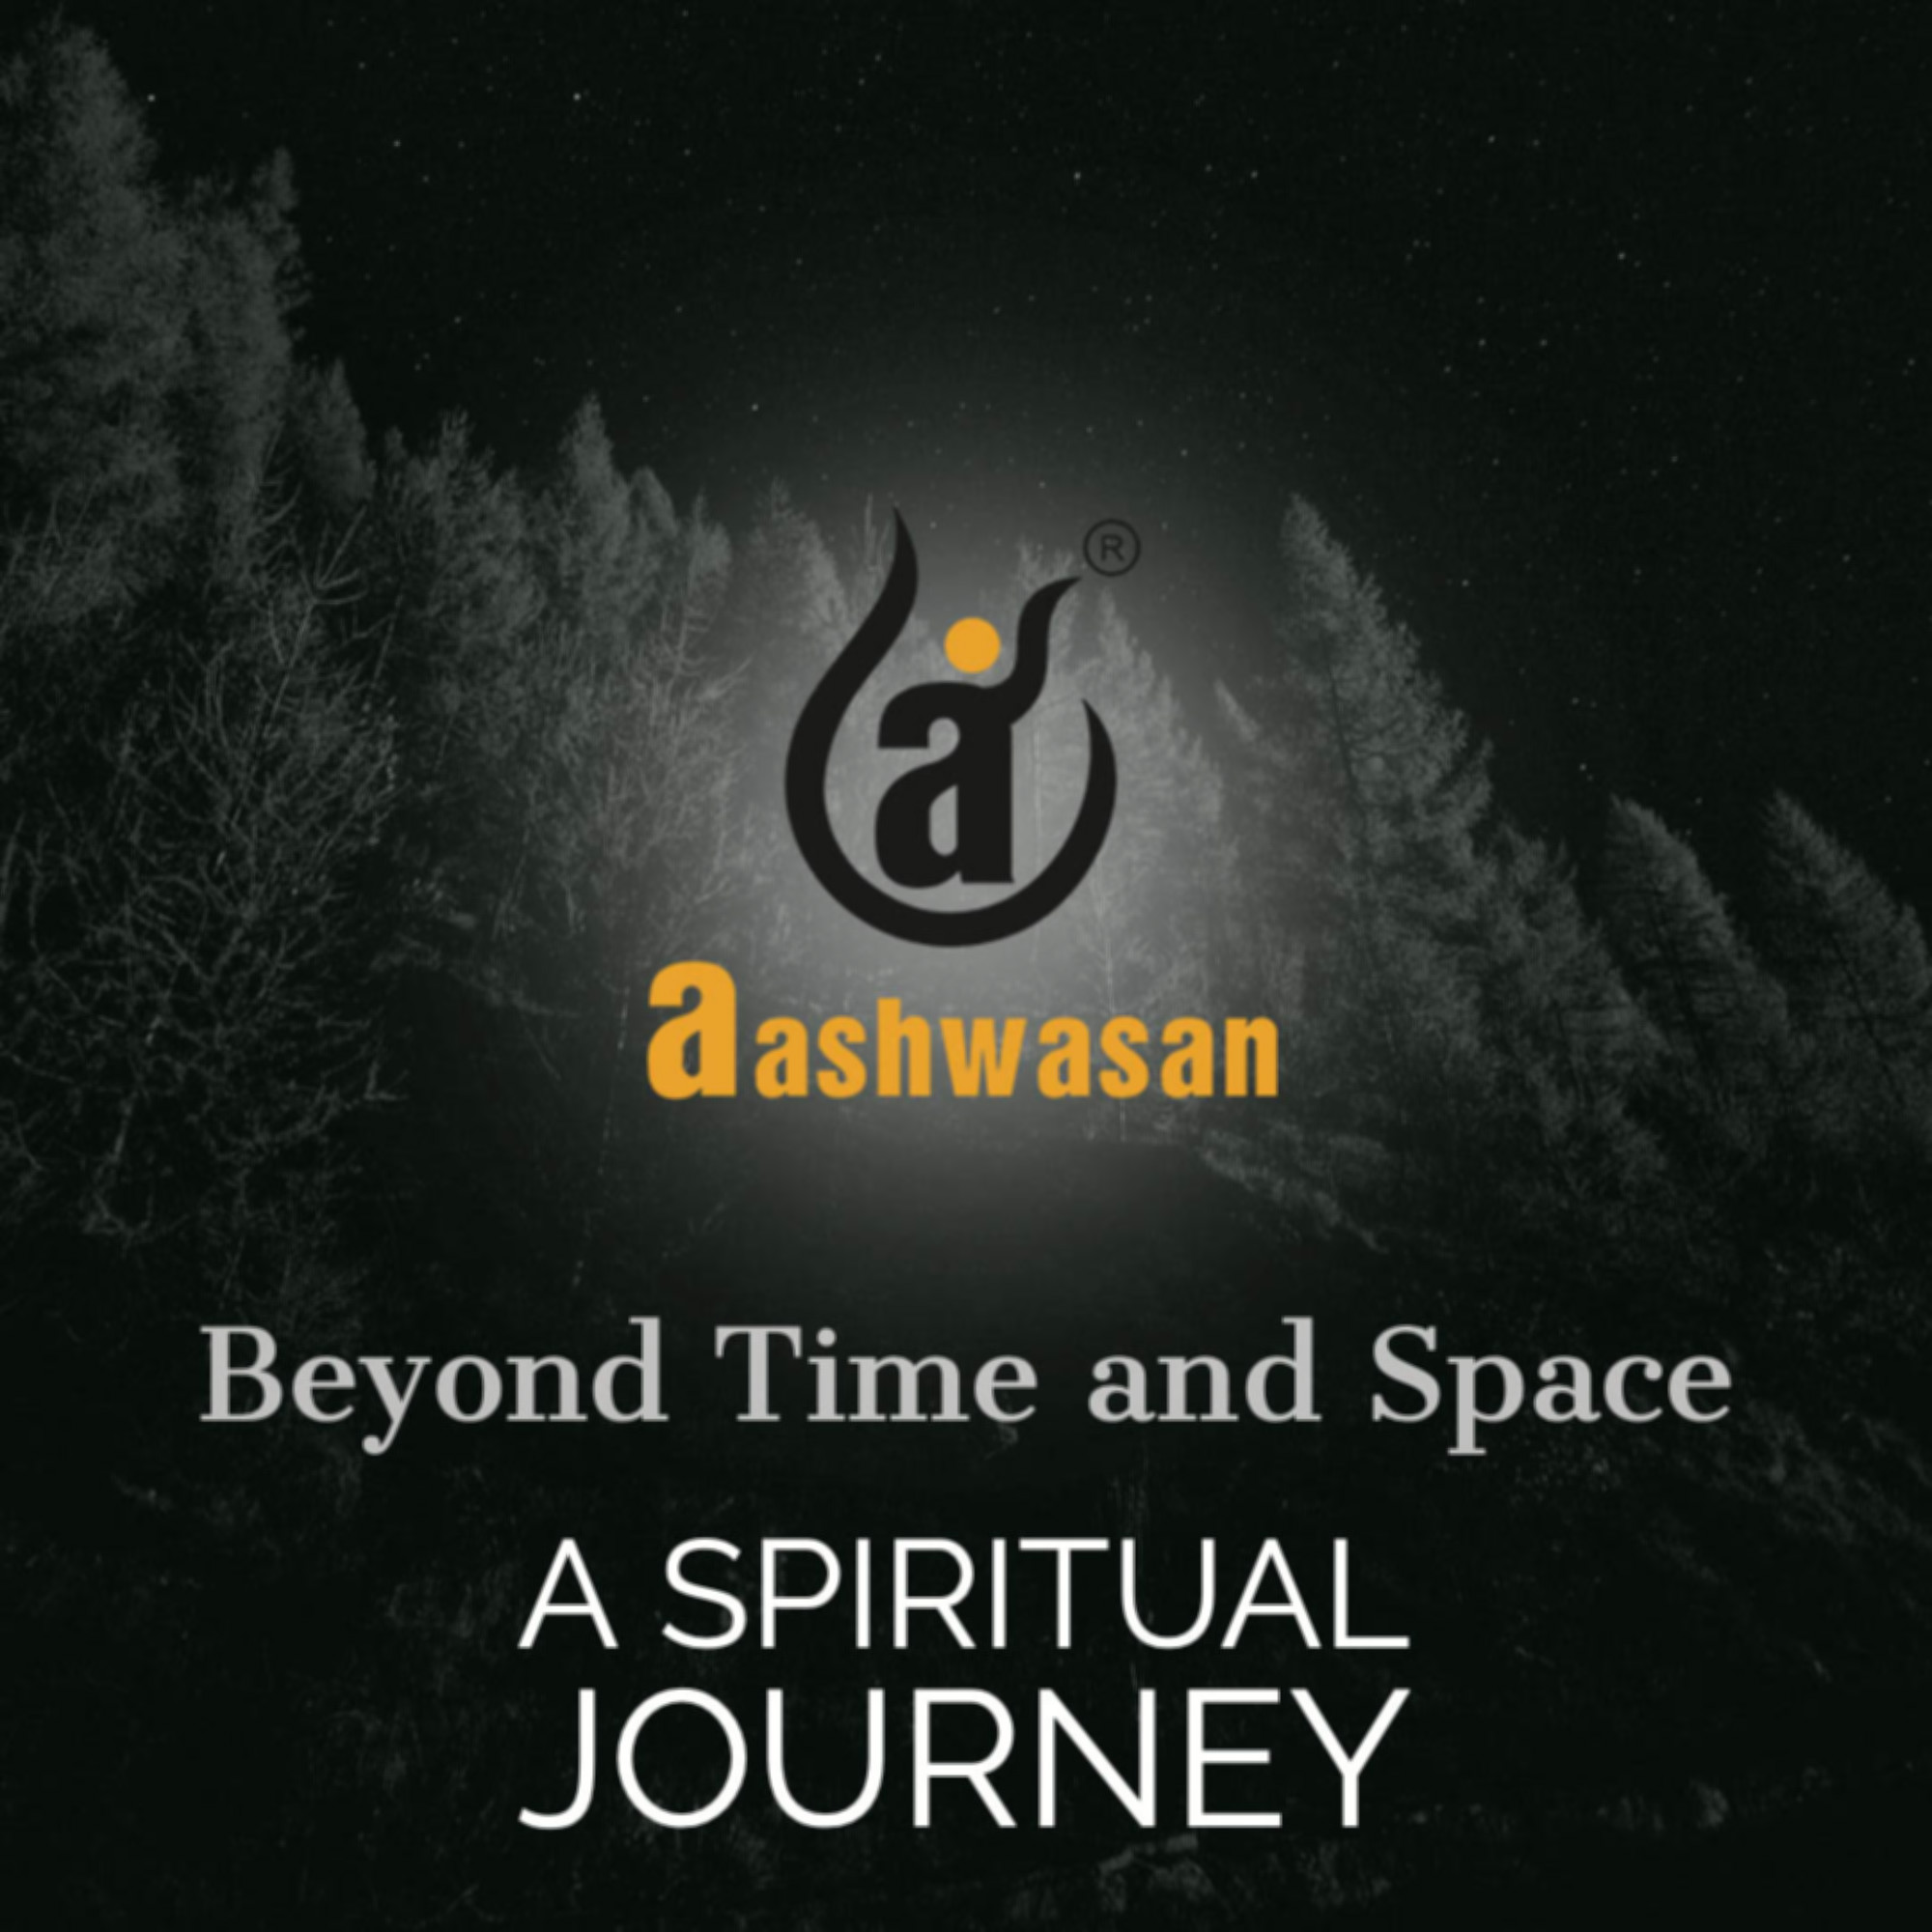 Beyond Time and Space - A Spiritual Journey. Aashwasan Podcast